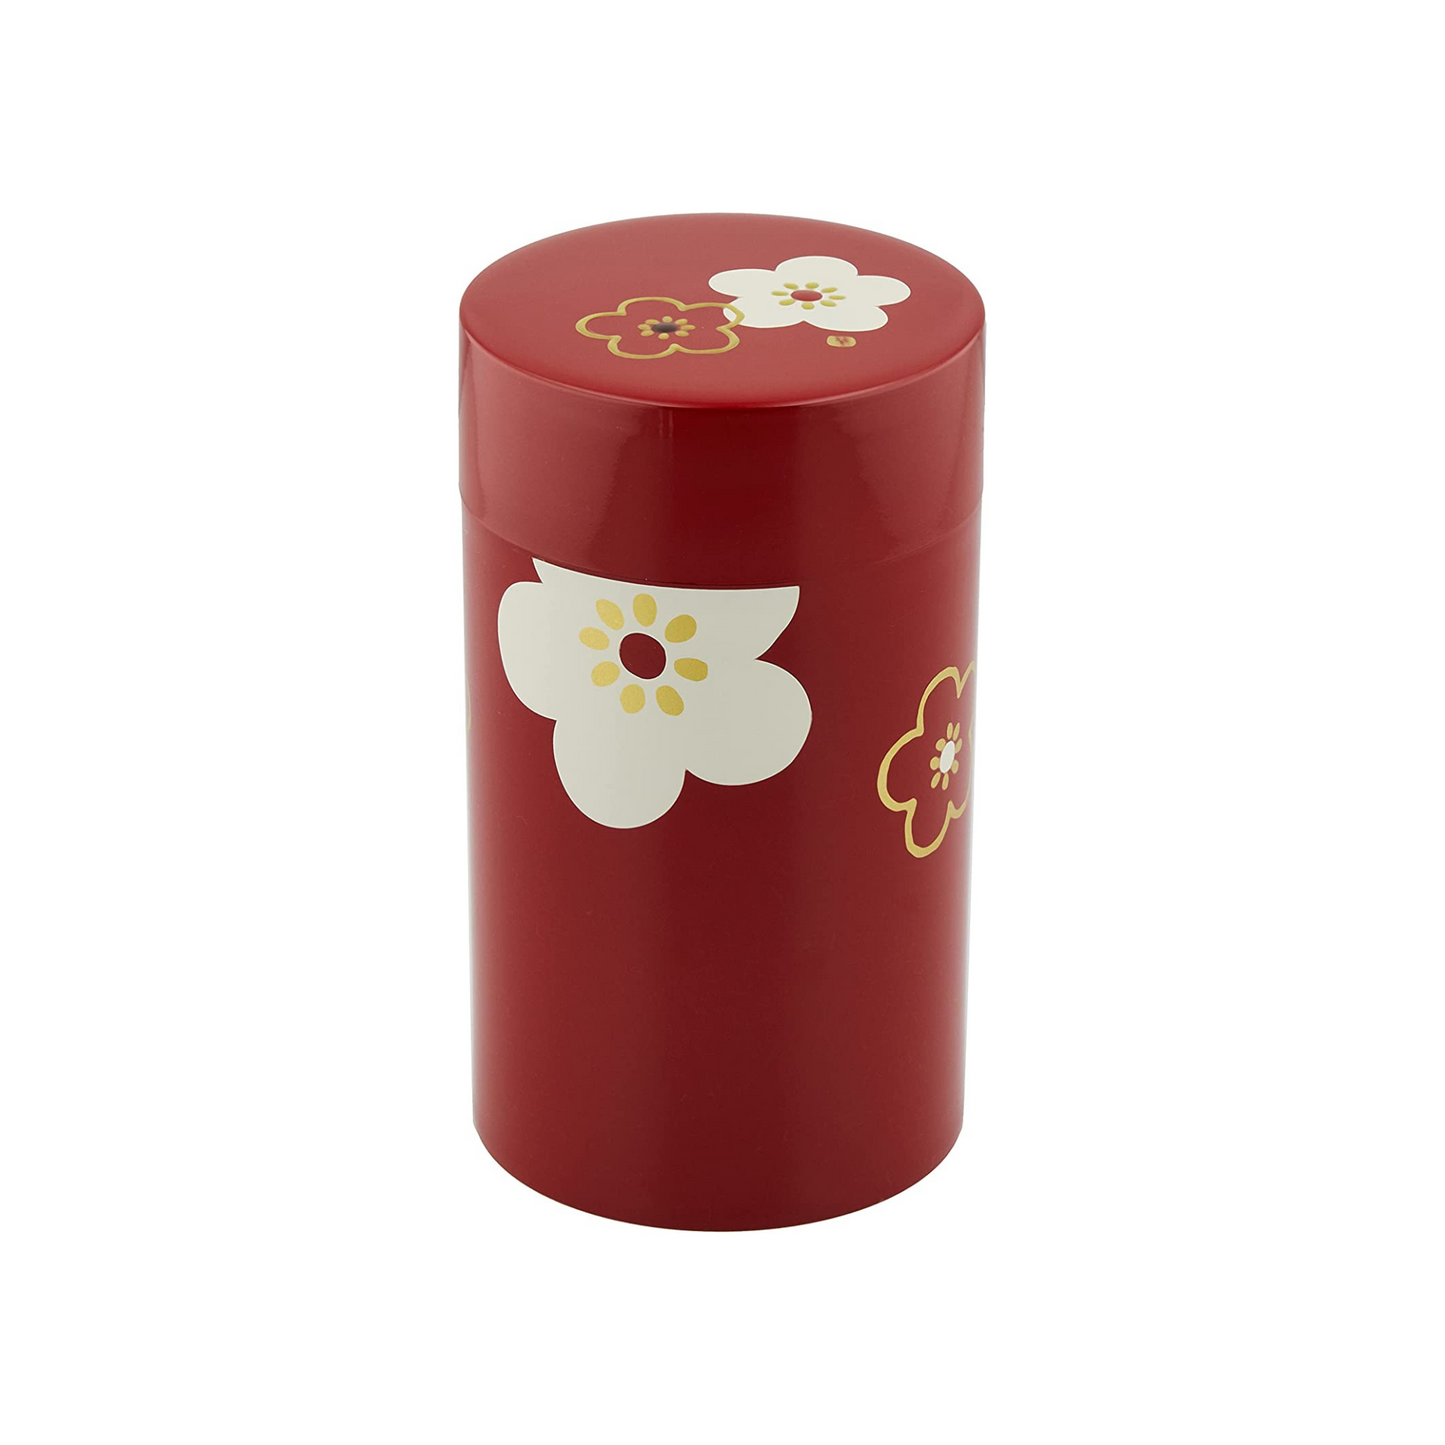 Hanamoyo Red Tea Canister | Large (650mL)